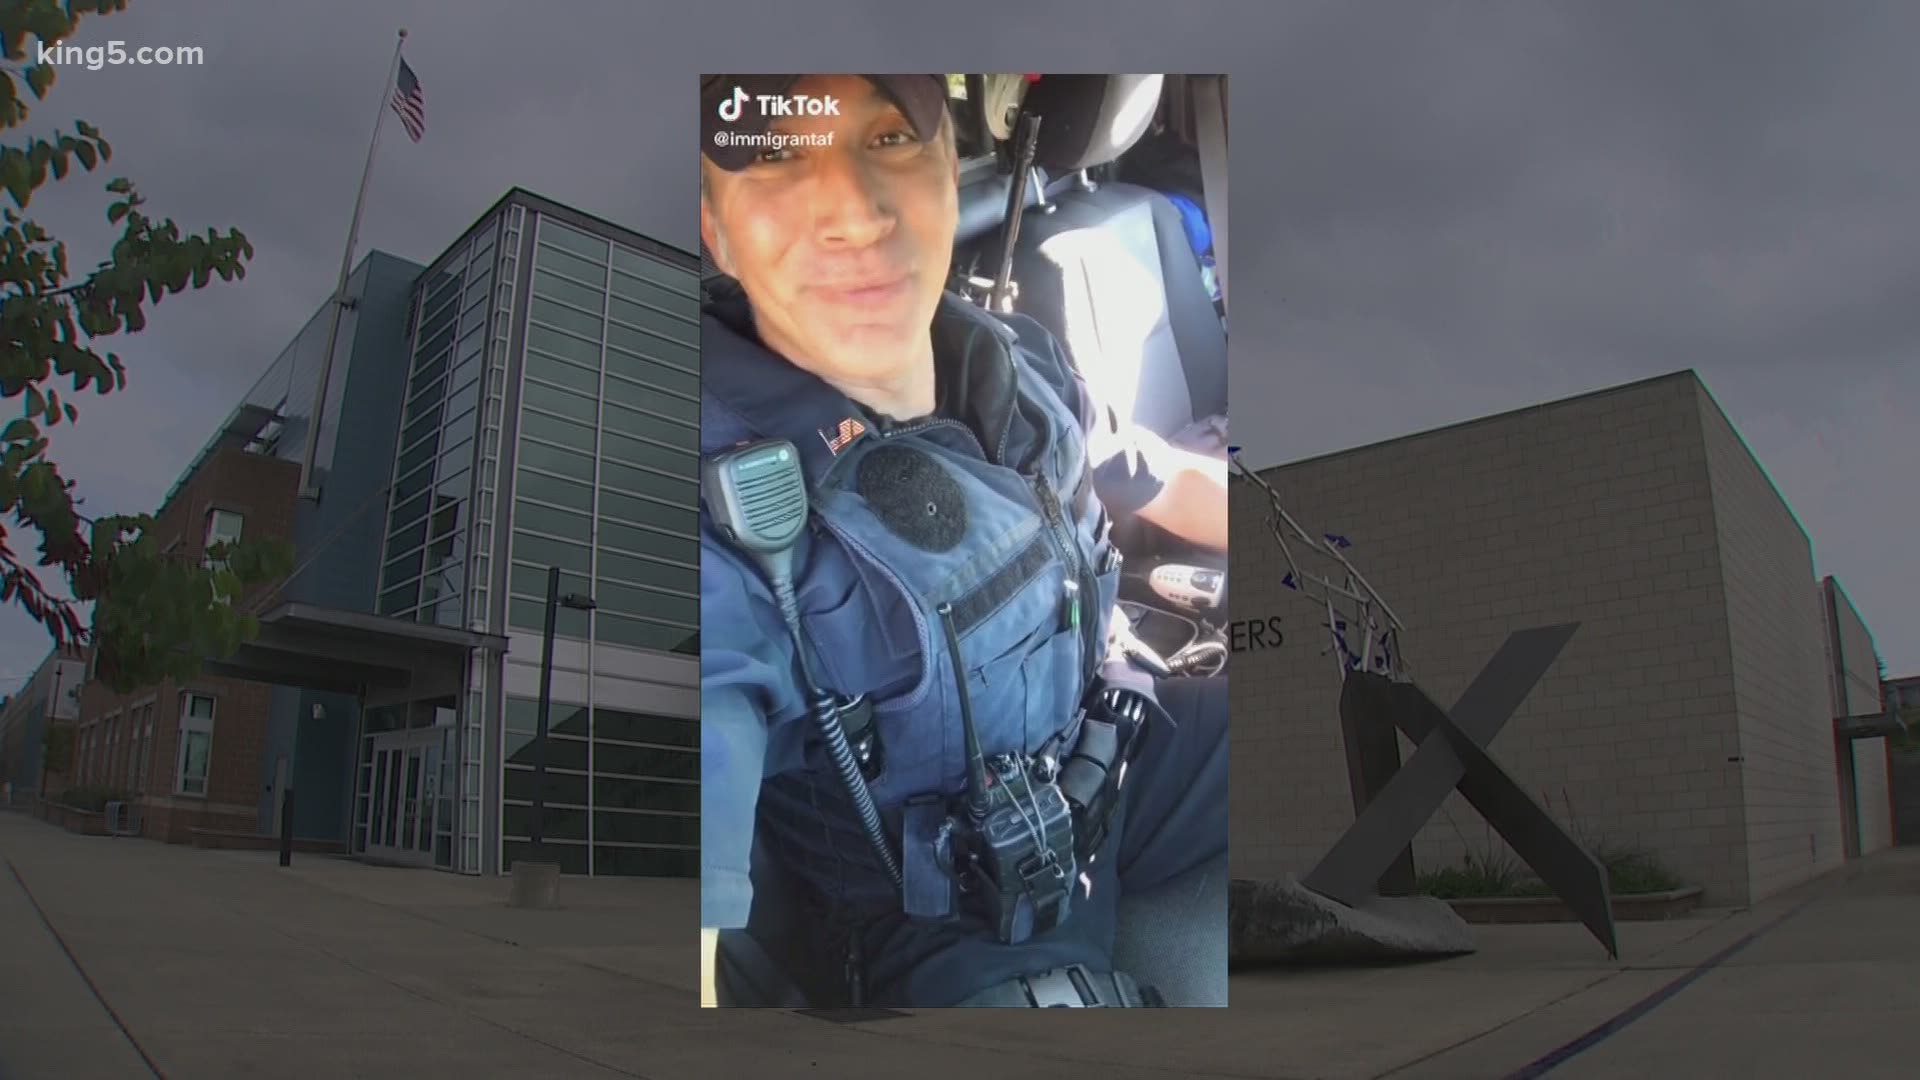 In a viral TikTok video, Tacoma police officer Sam Lopez is seen in uniform being critical of a defund the police protest. The department is now investigating.